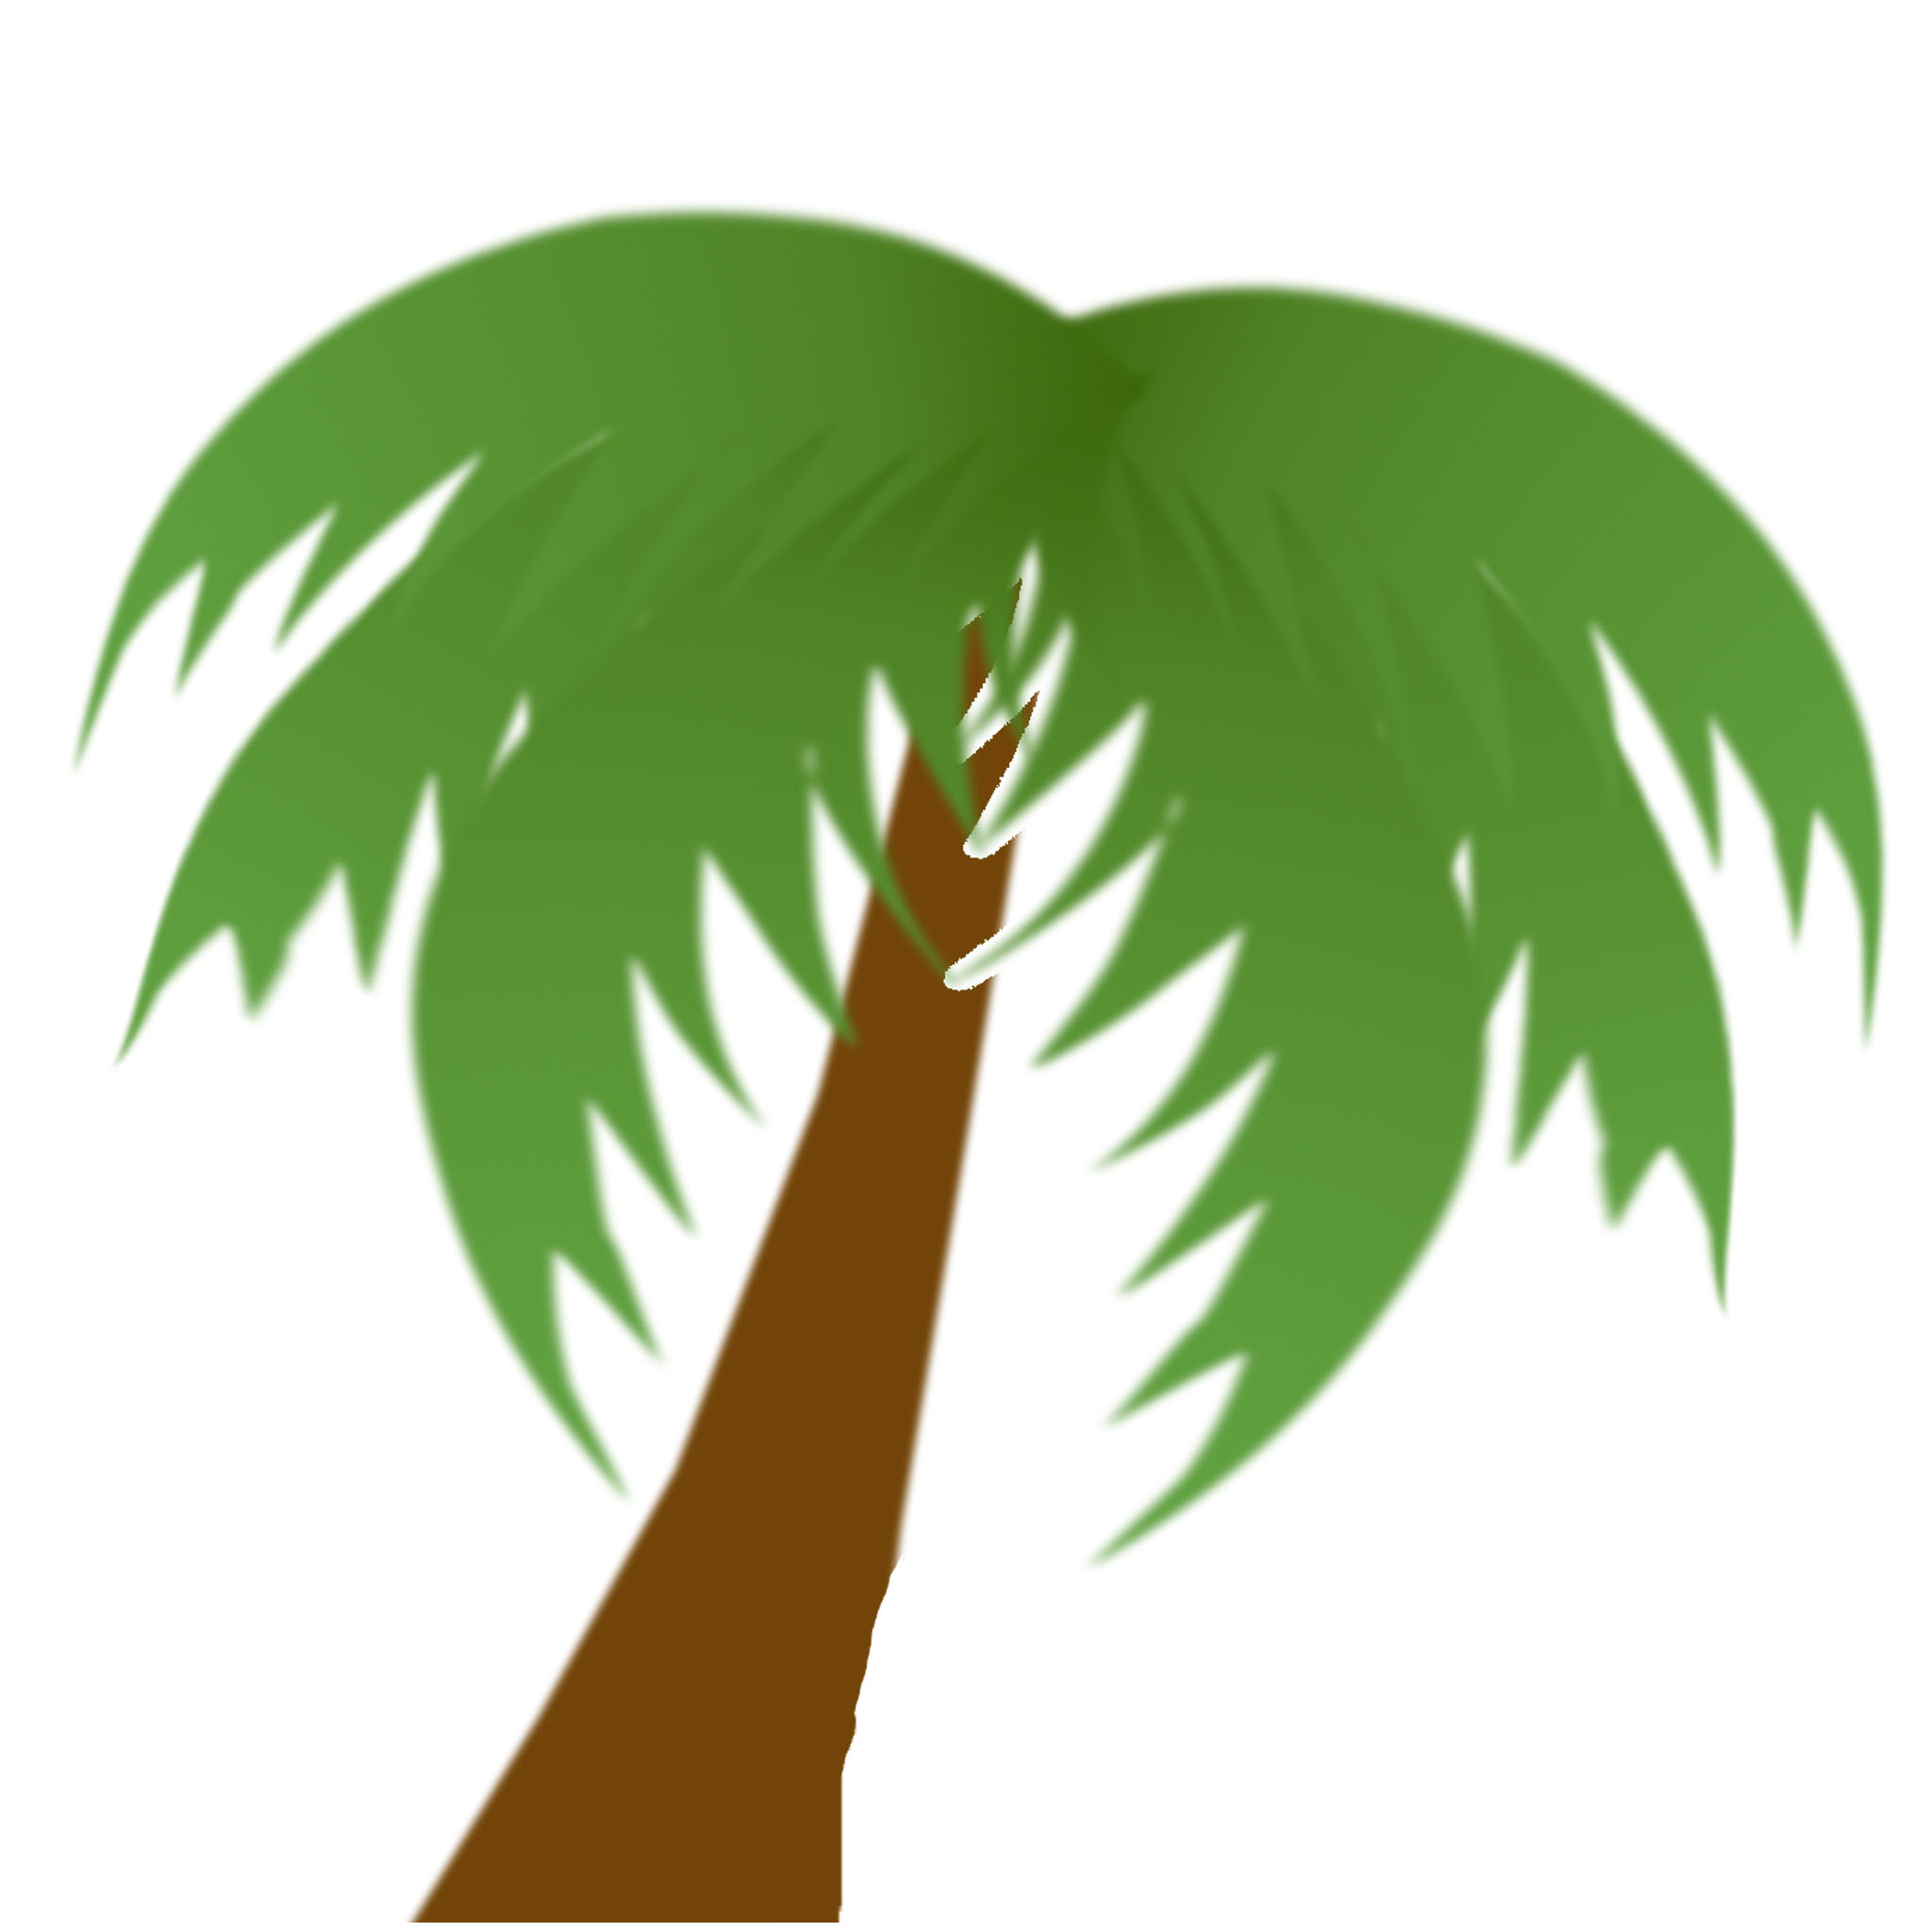 Animated Banana Tree - ClipArt Best - ClipArt Best - ClipArt Best